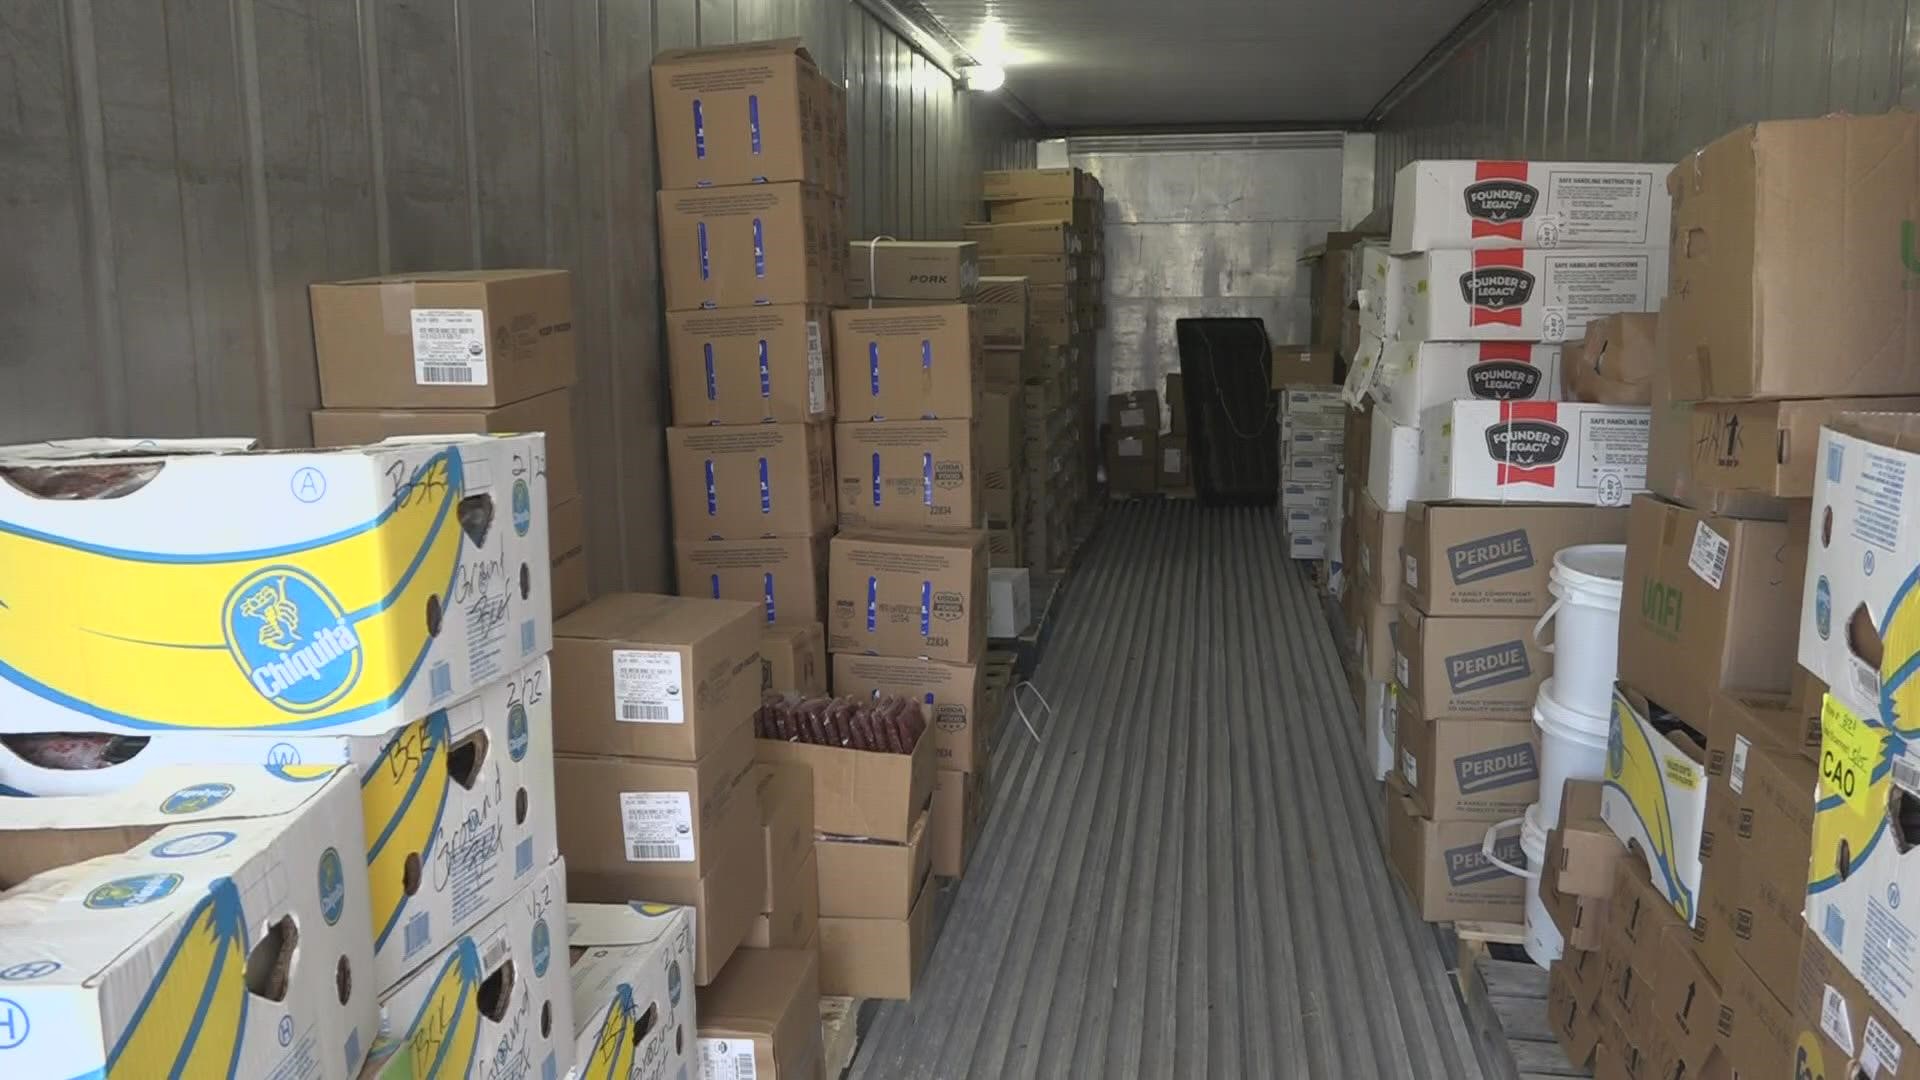 The storage units were made possible through a Good Shepherd Food Bank $60,000 donation to the Belfast Soup Kitchen.